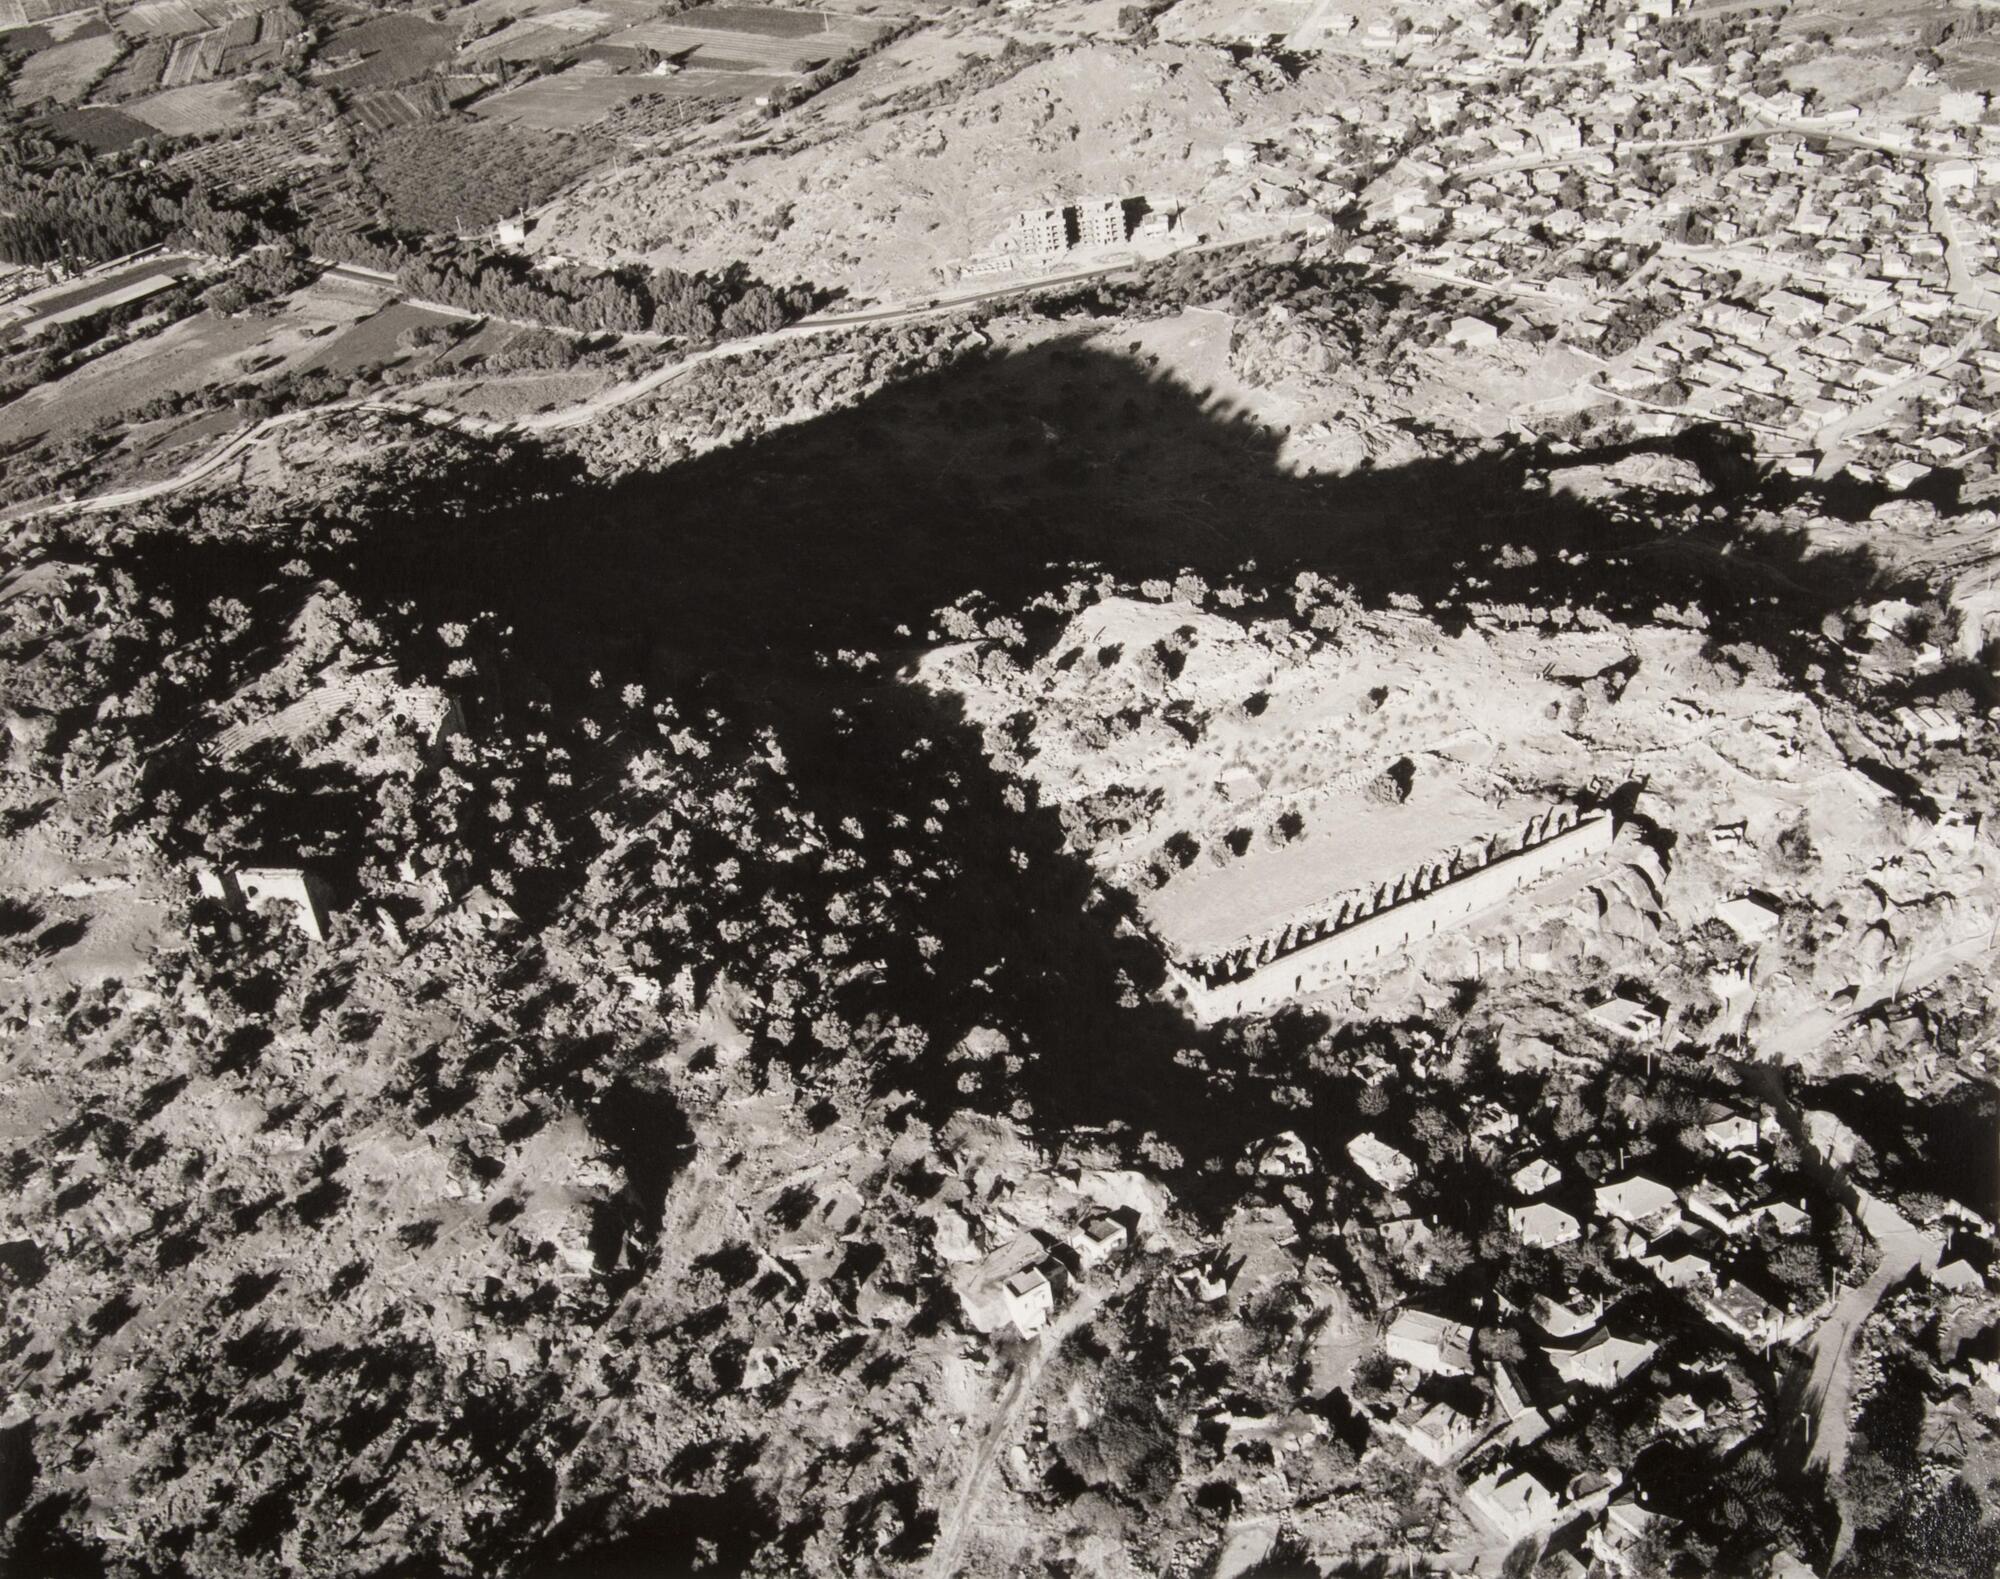 This photograph depicts an aeriel view of ancient ruins situated next to a town on a hillside.